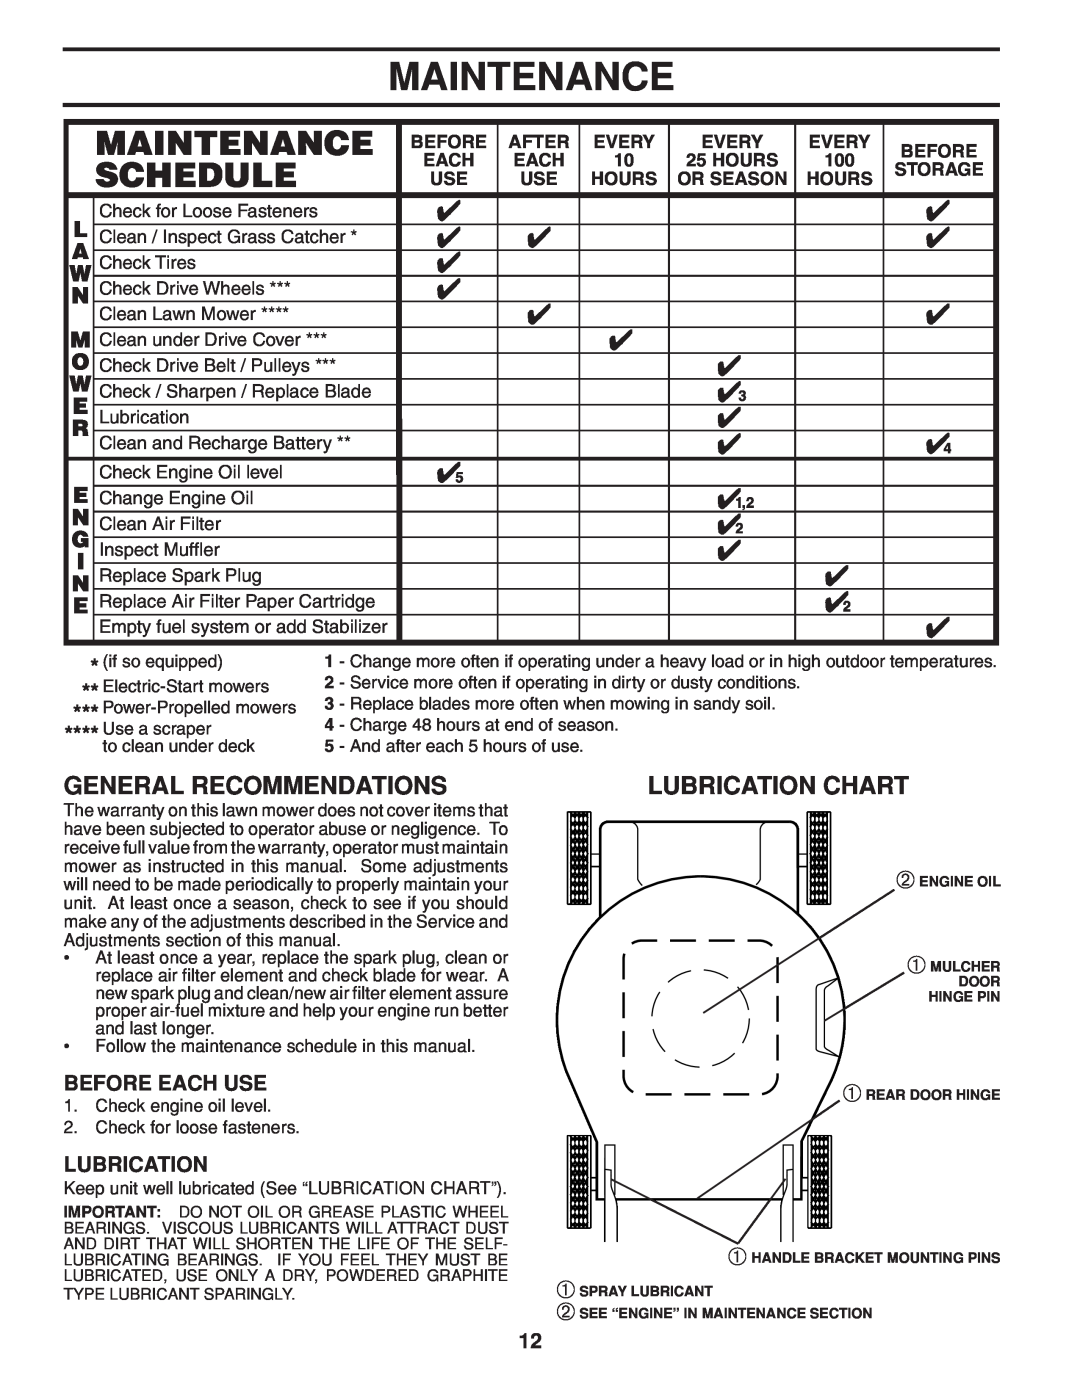 Husqvarna 961430103, 961430104 warranty Maintenance, General Recommendations, Lubrication Chart, Before Each Use 